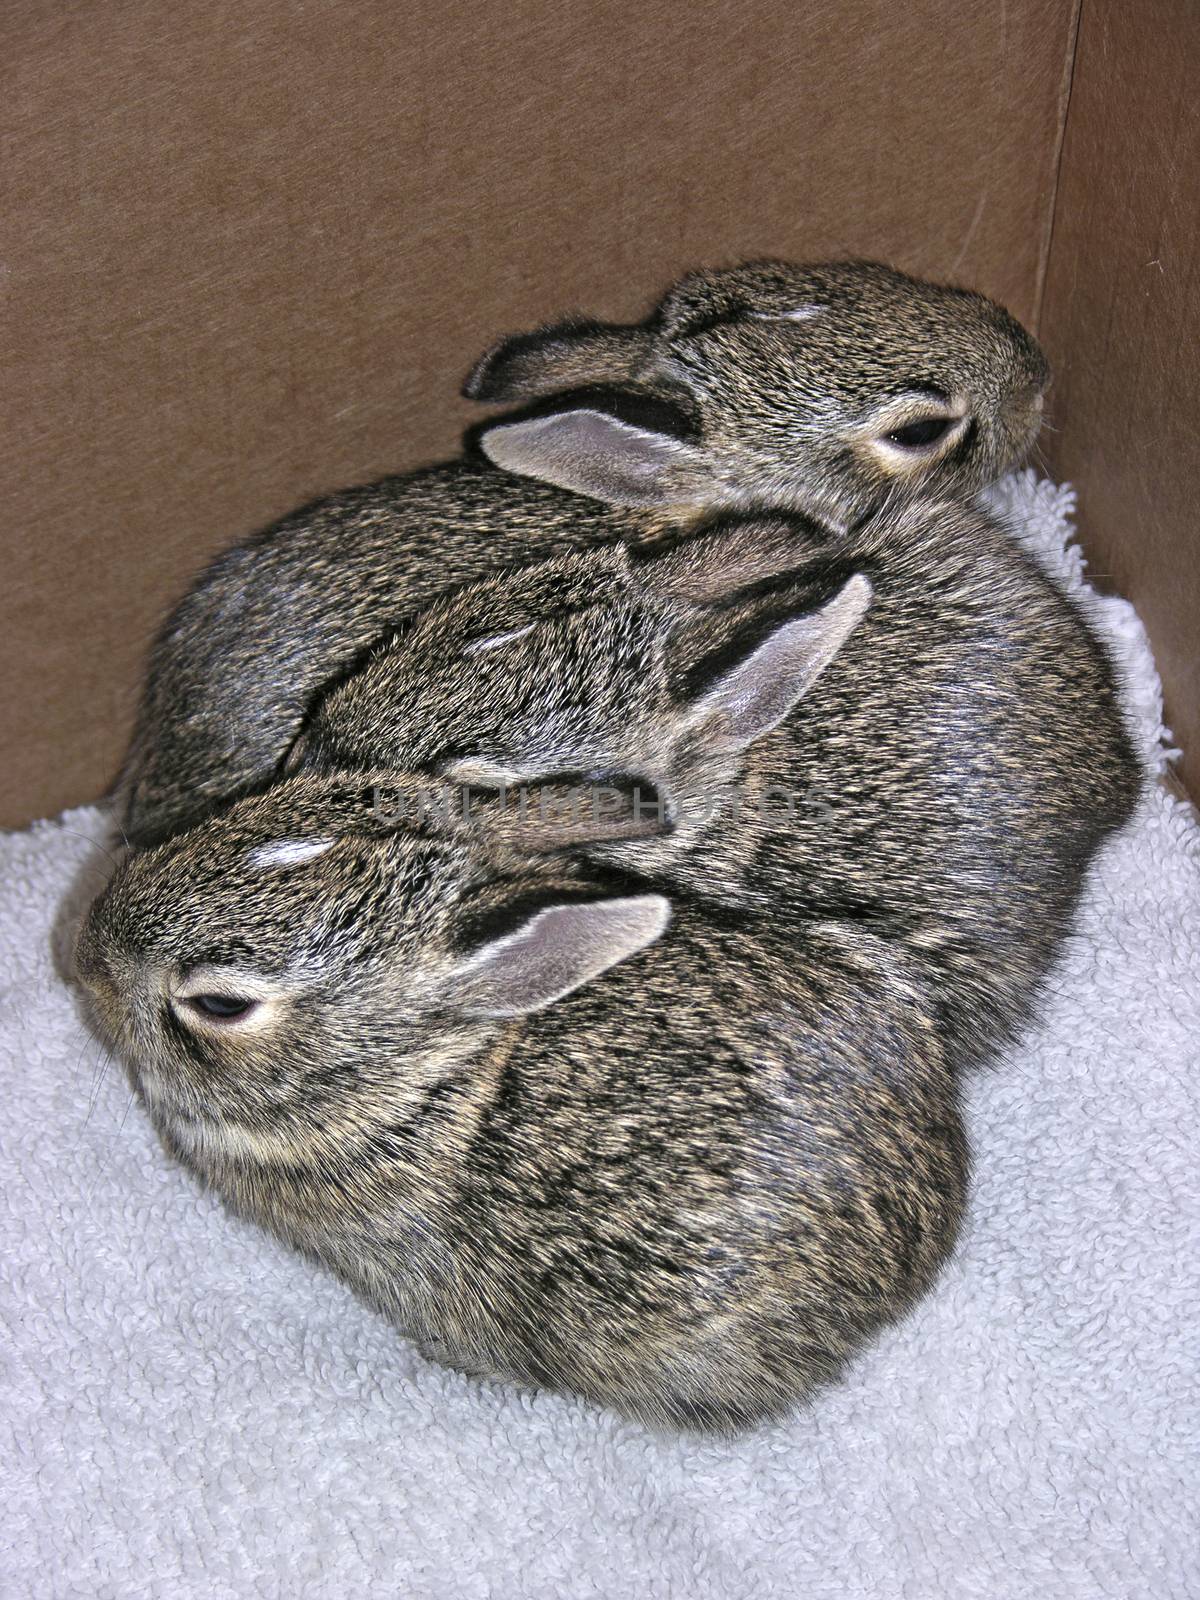 Baby rabbits which were rescued twice from their nest during mowing. They were returned to thier nest each time, and fortunately their mother returned to care for them.